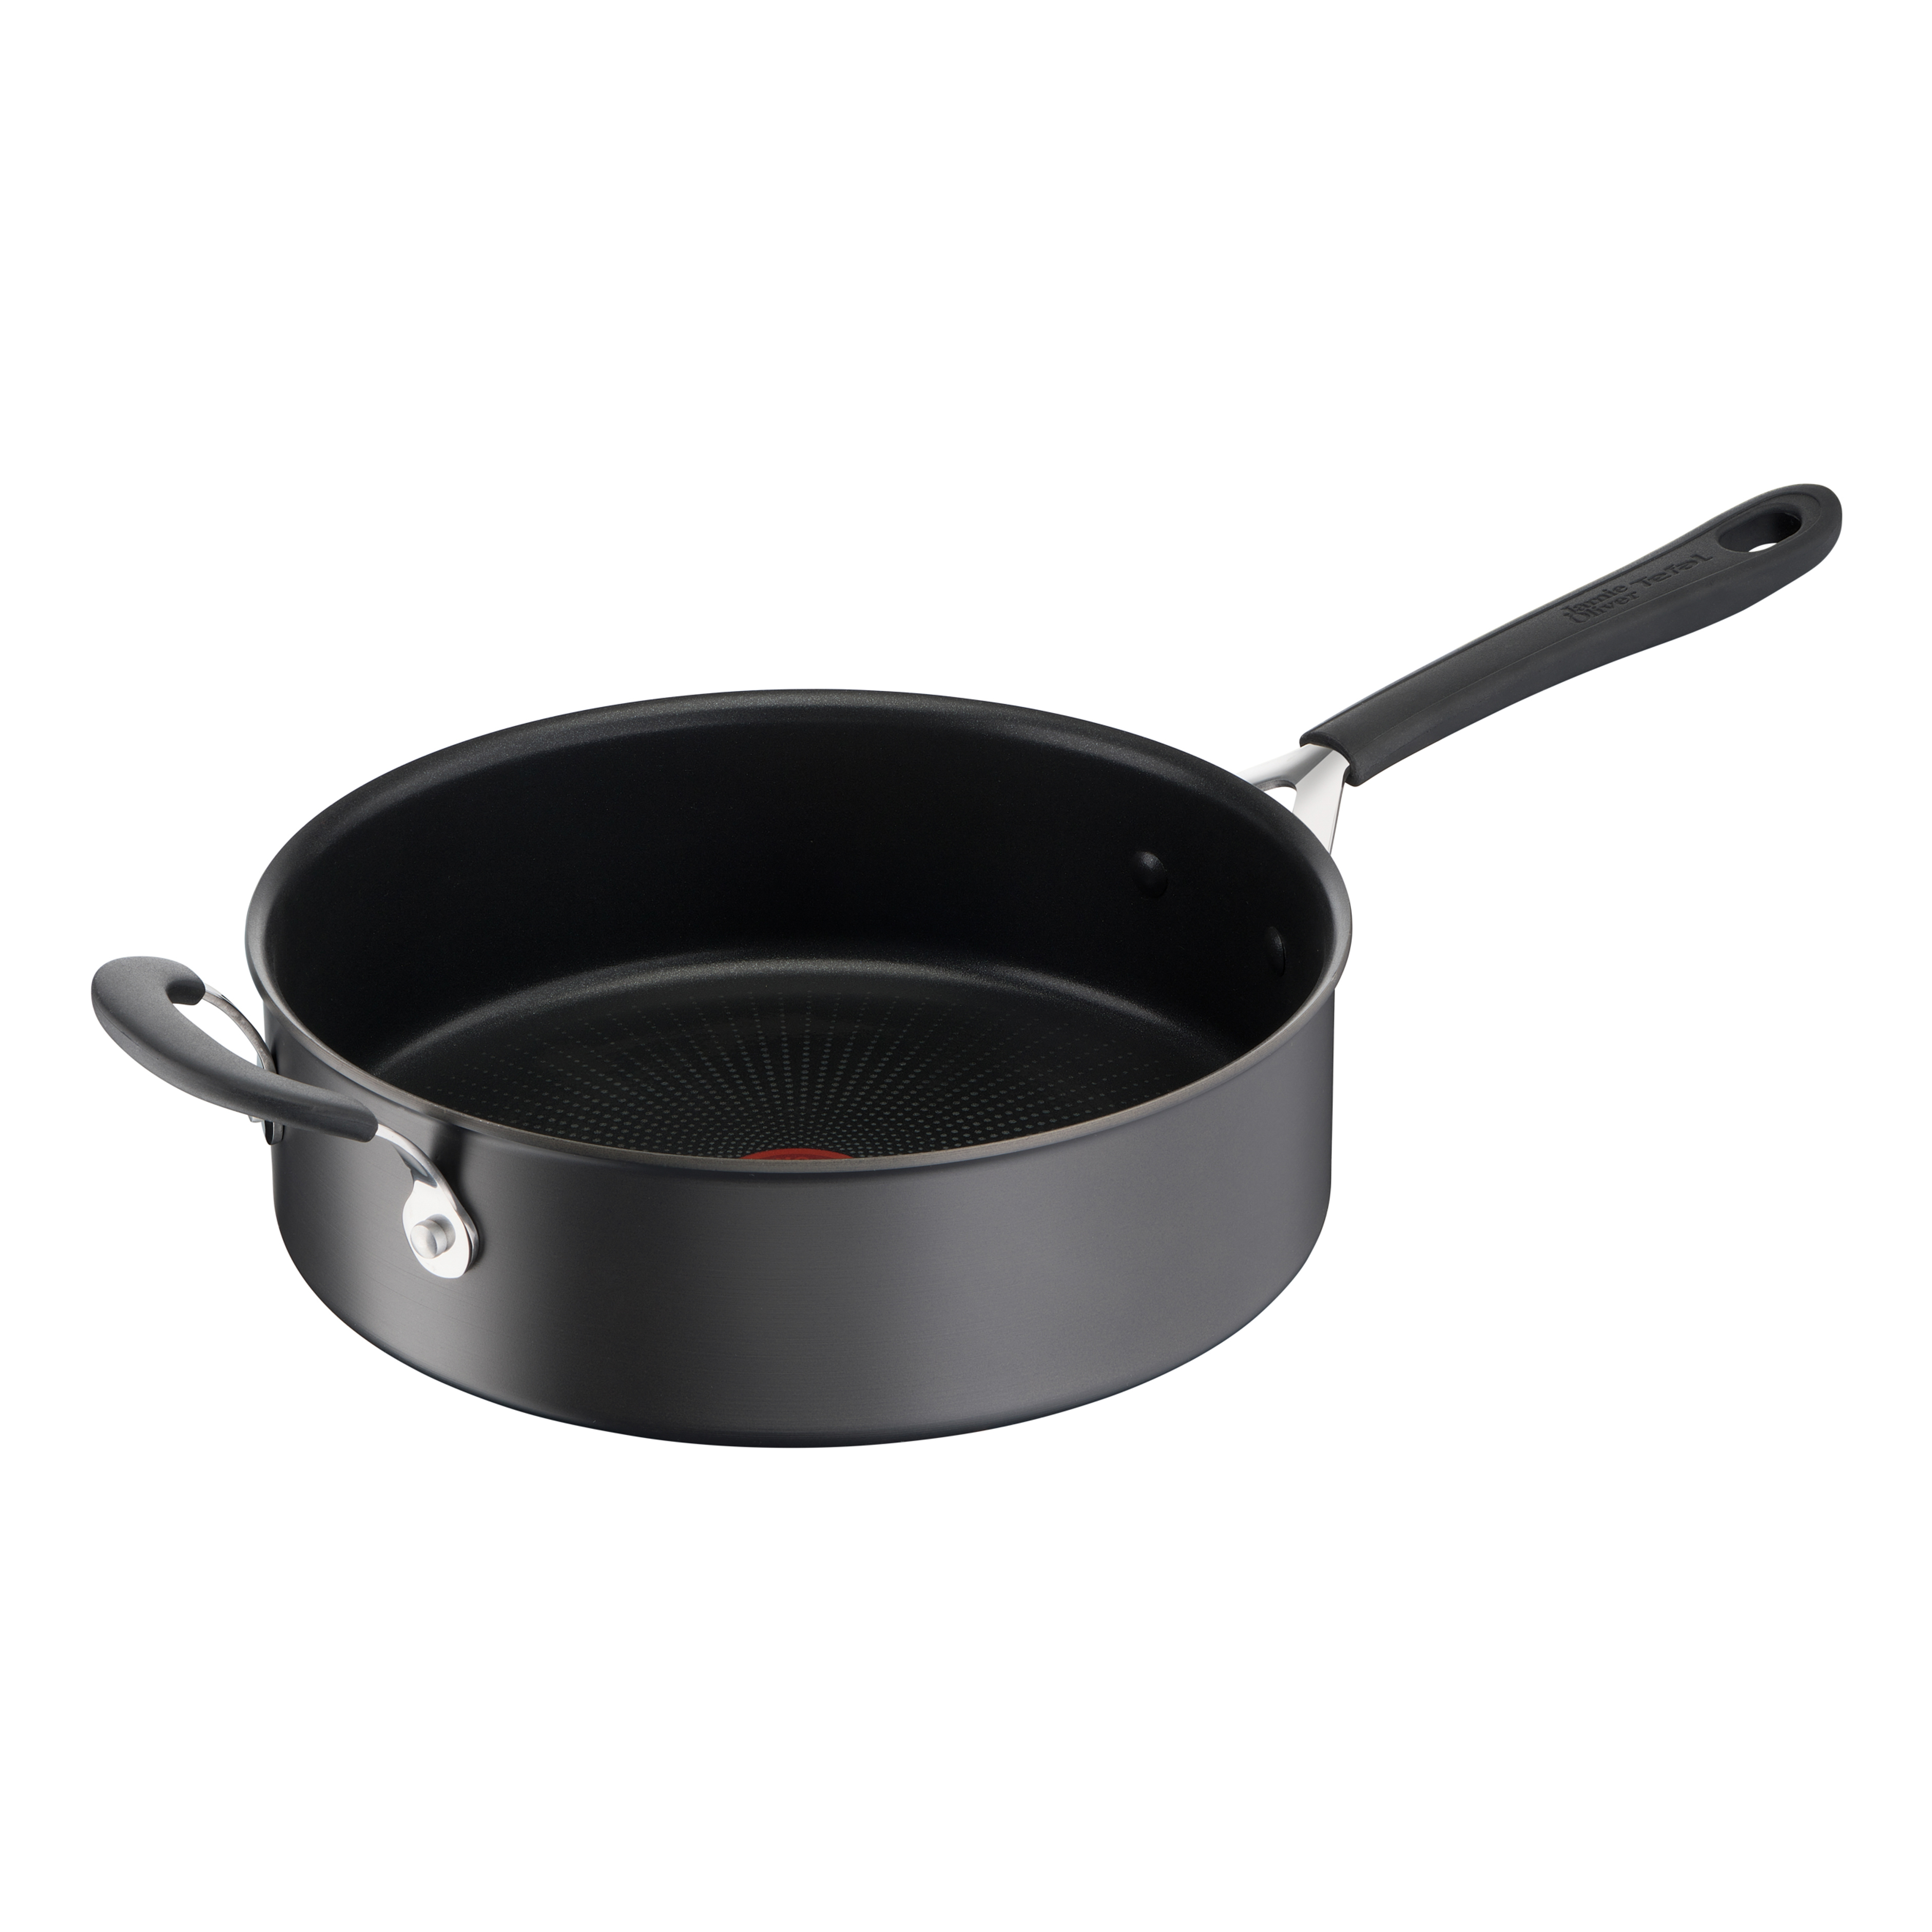 Jamie Oliver Quick & Easy anodised saute pan hard from Tefal